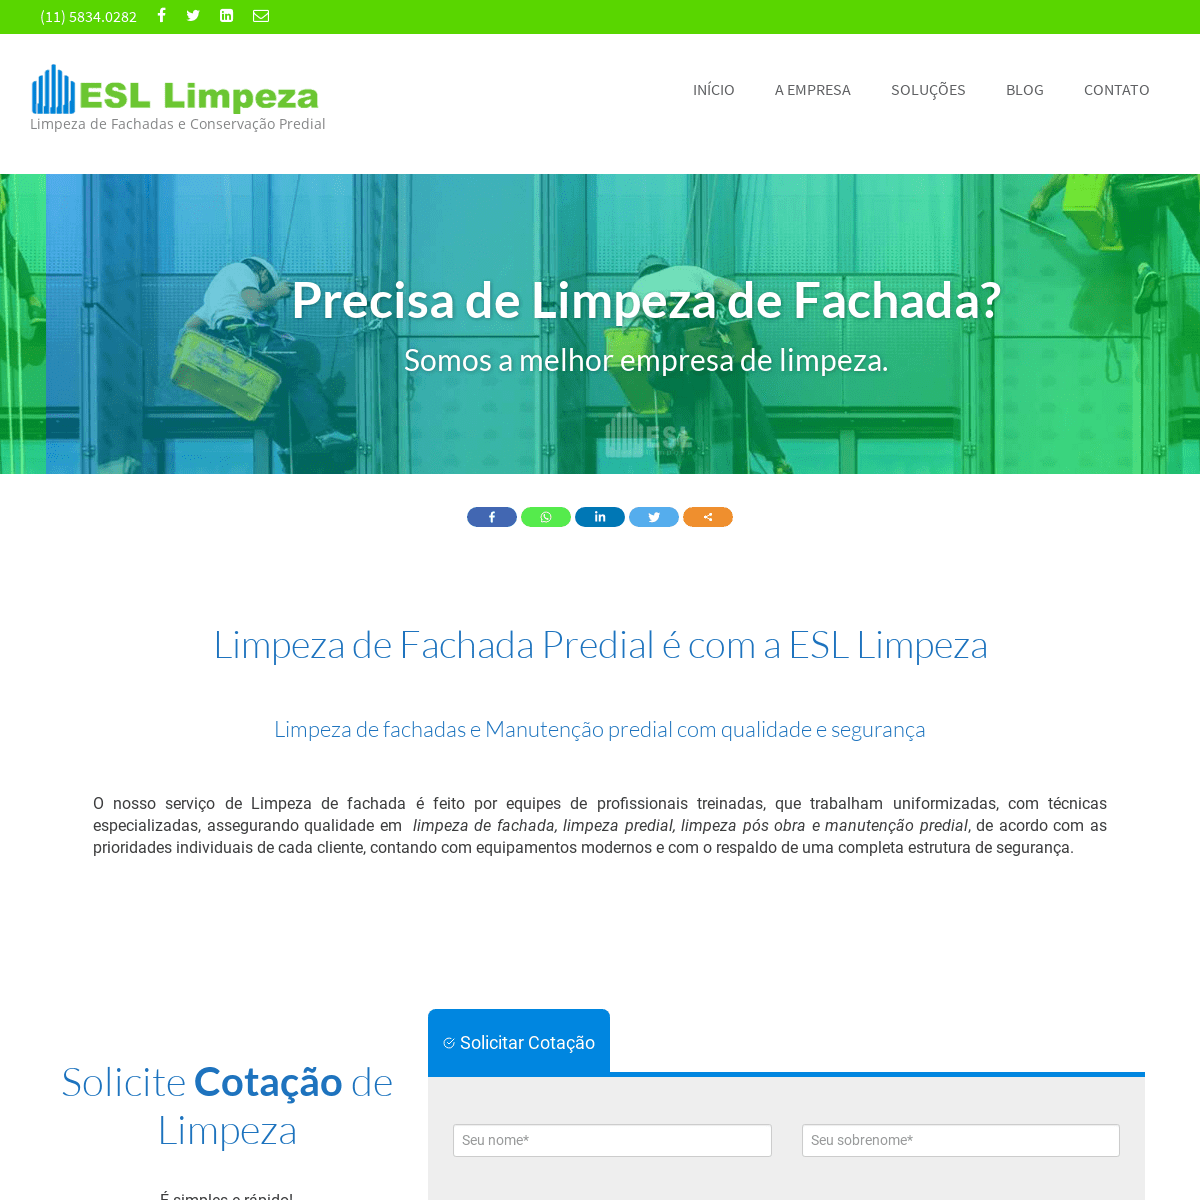 A complete backup of esllimpeza.com.br